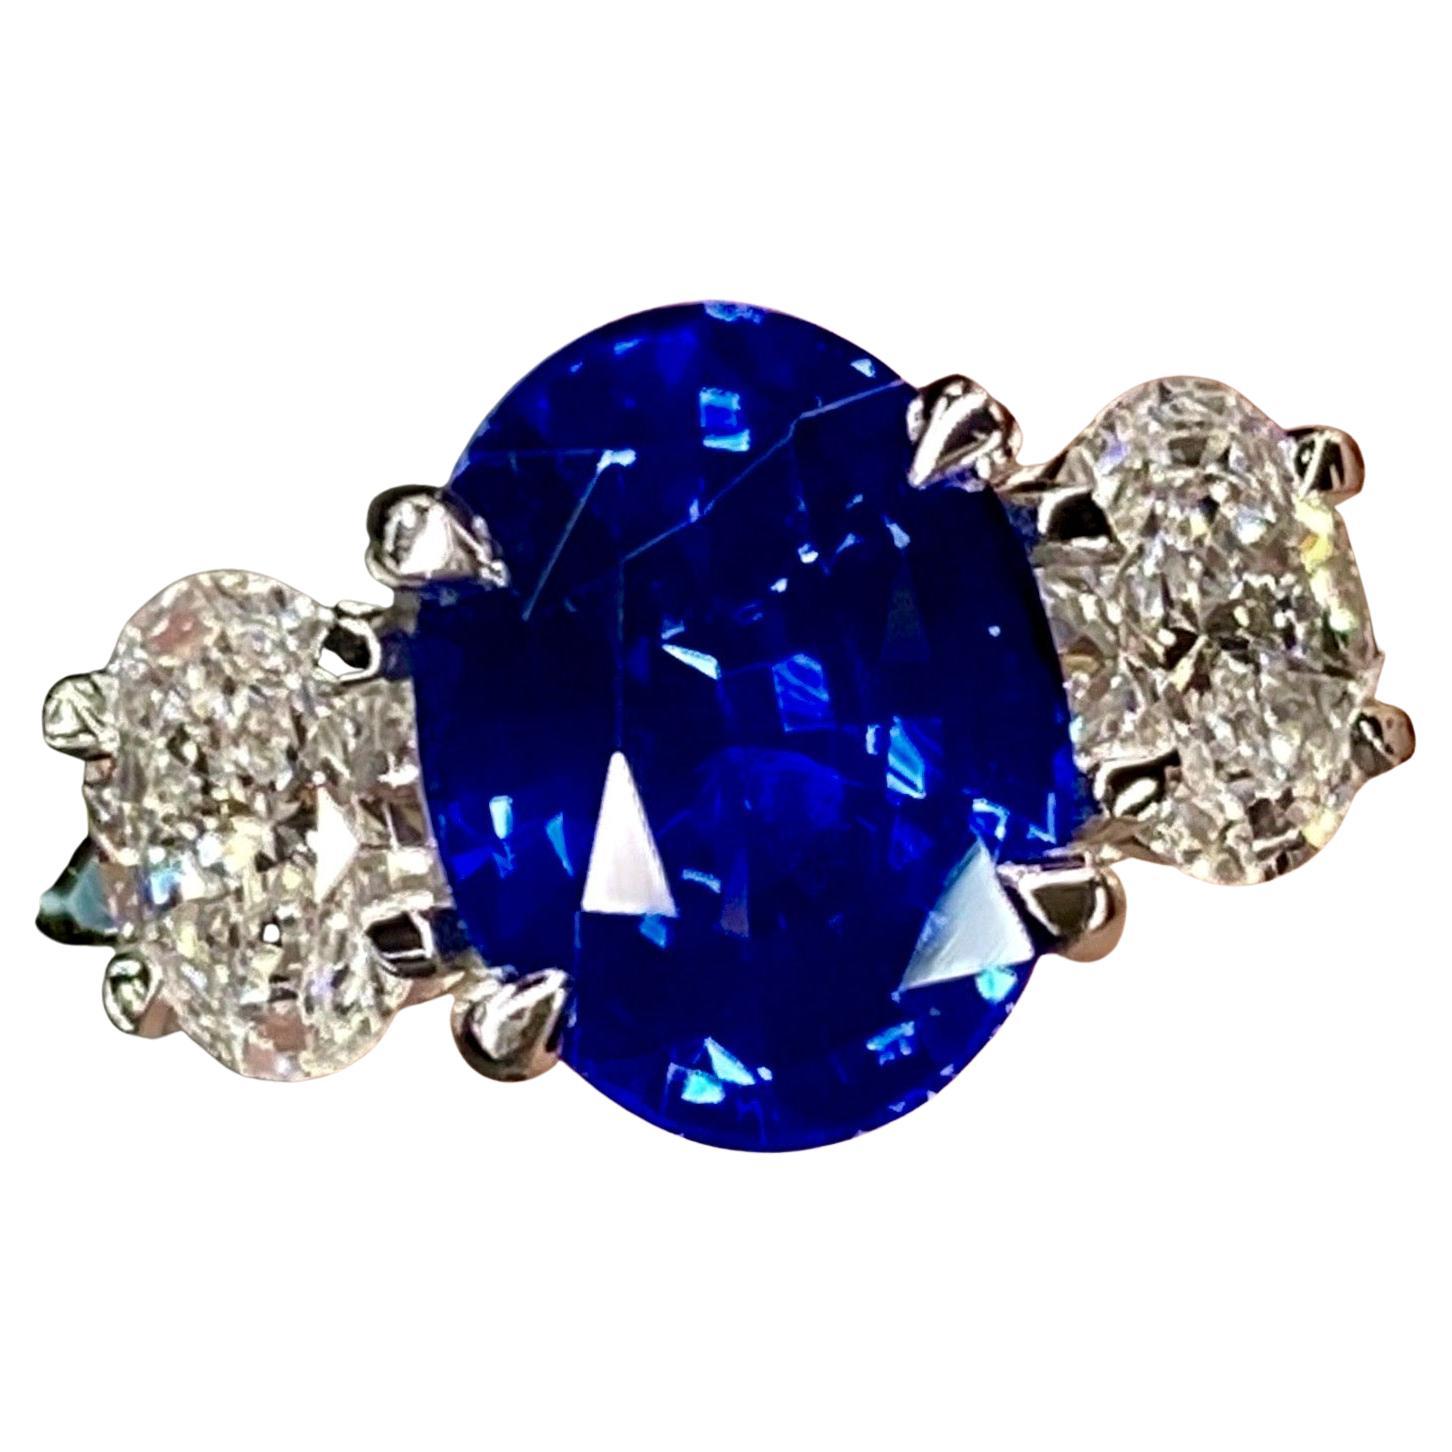 ***Made to order to your finger size, custom options are available, don't hesitate to inquire***
The Center Stone is a gorgeous 2.50 Carat Oval Cut Intense Velvet Blue Burmese Sapphire that Measures approximately 9.0 x 6.1mm. This Sapphire with